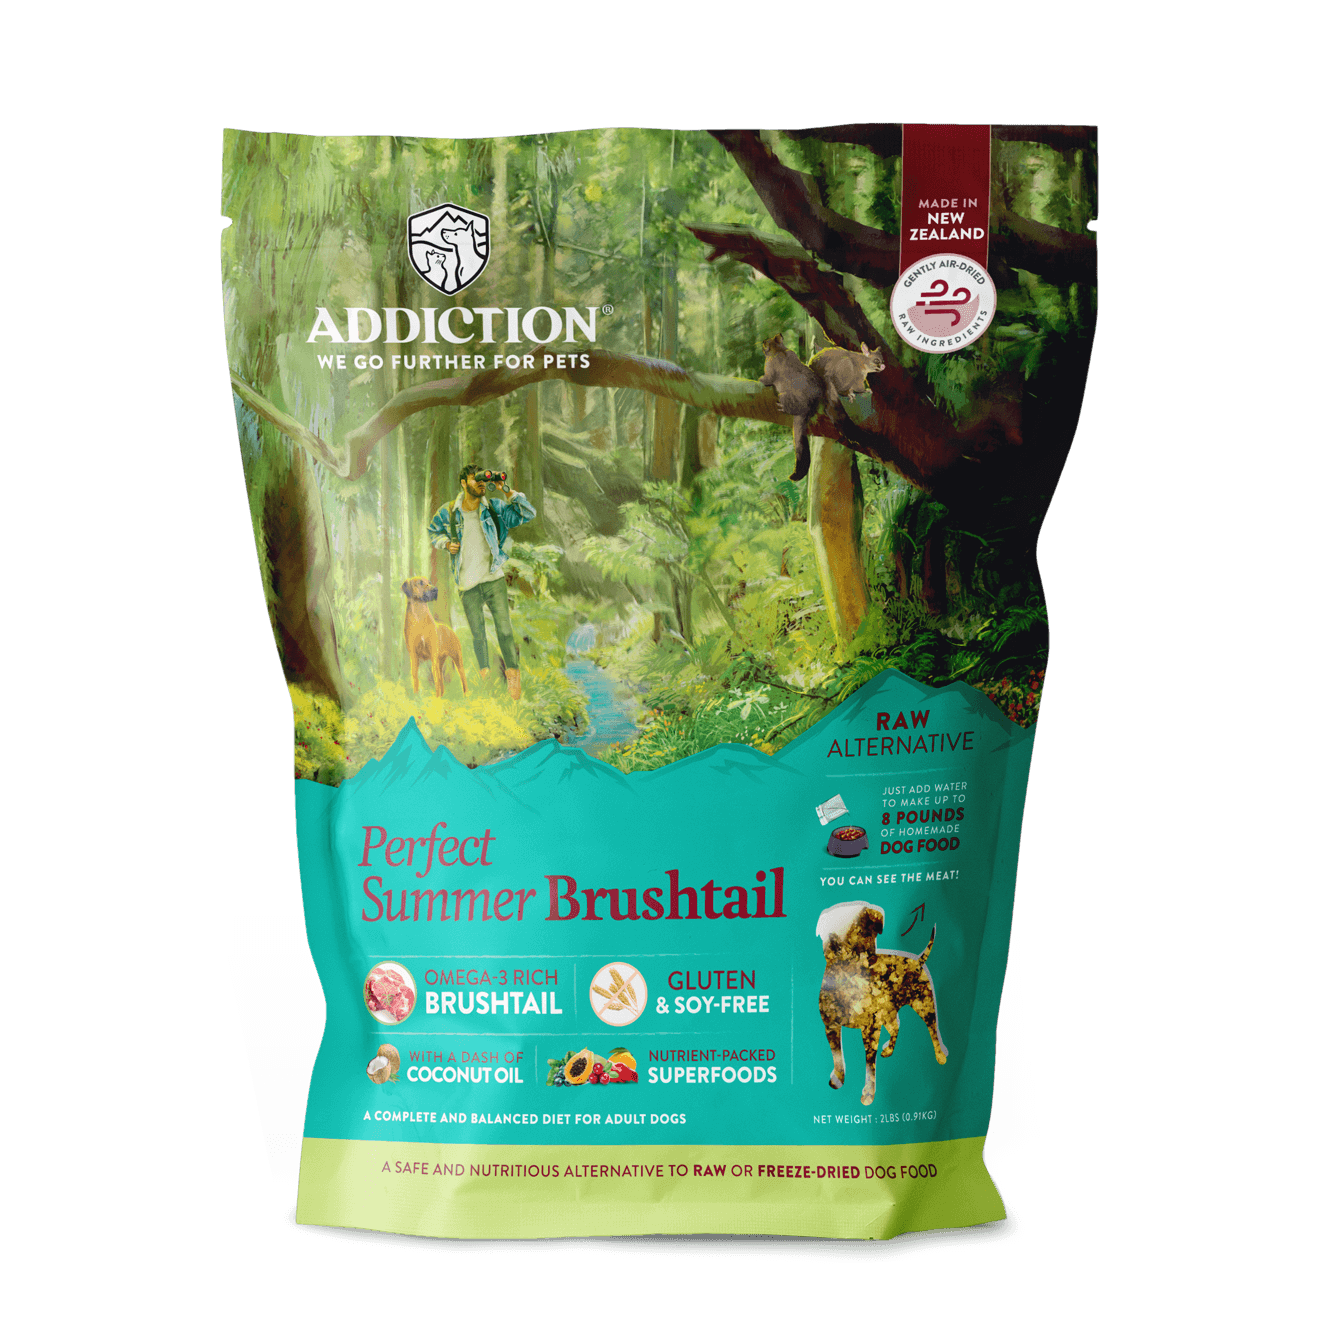 Addiction Perfect Summer Brushtail Grain-Free Raw Dehydrated Food for Dogs (2lbs)